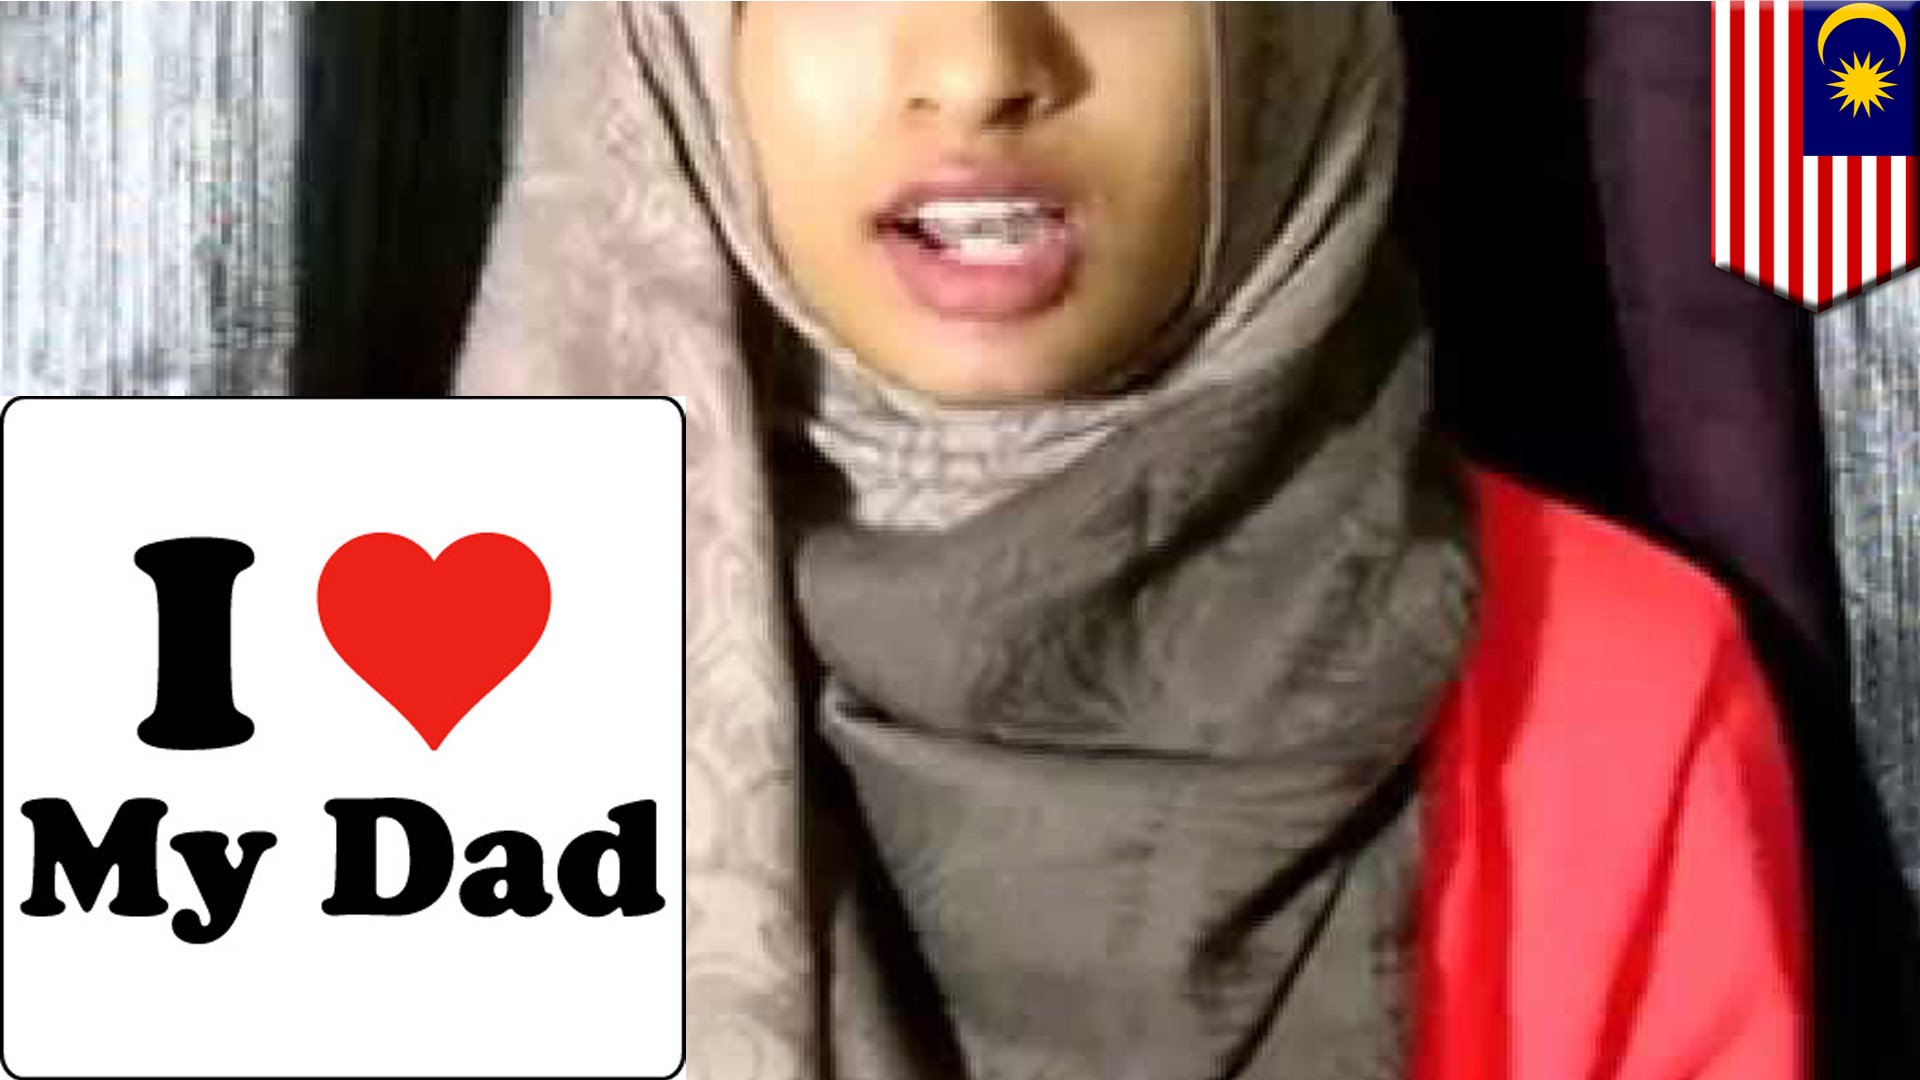 Father Daughter Incest Couple Busted In Hotel Room Police In Malaysia Tomonews Youtube